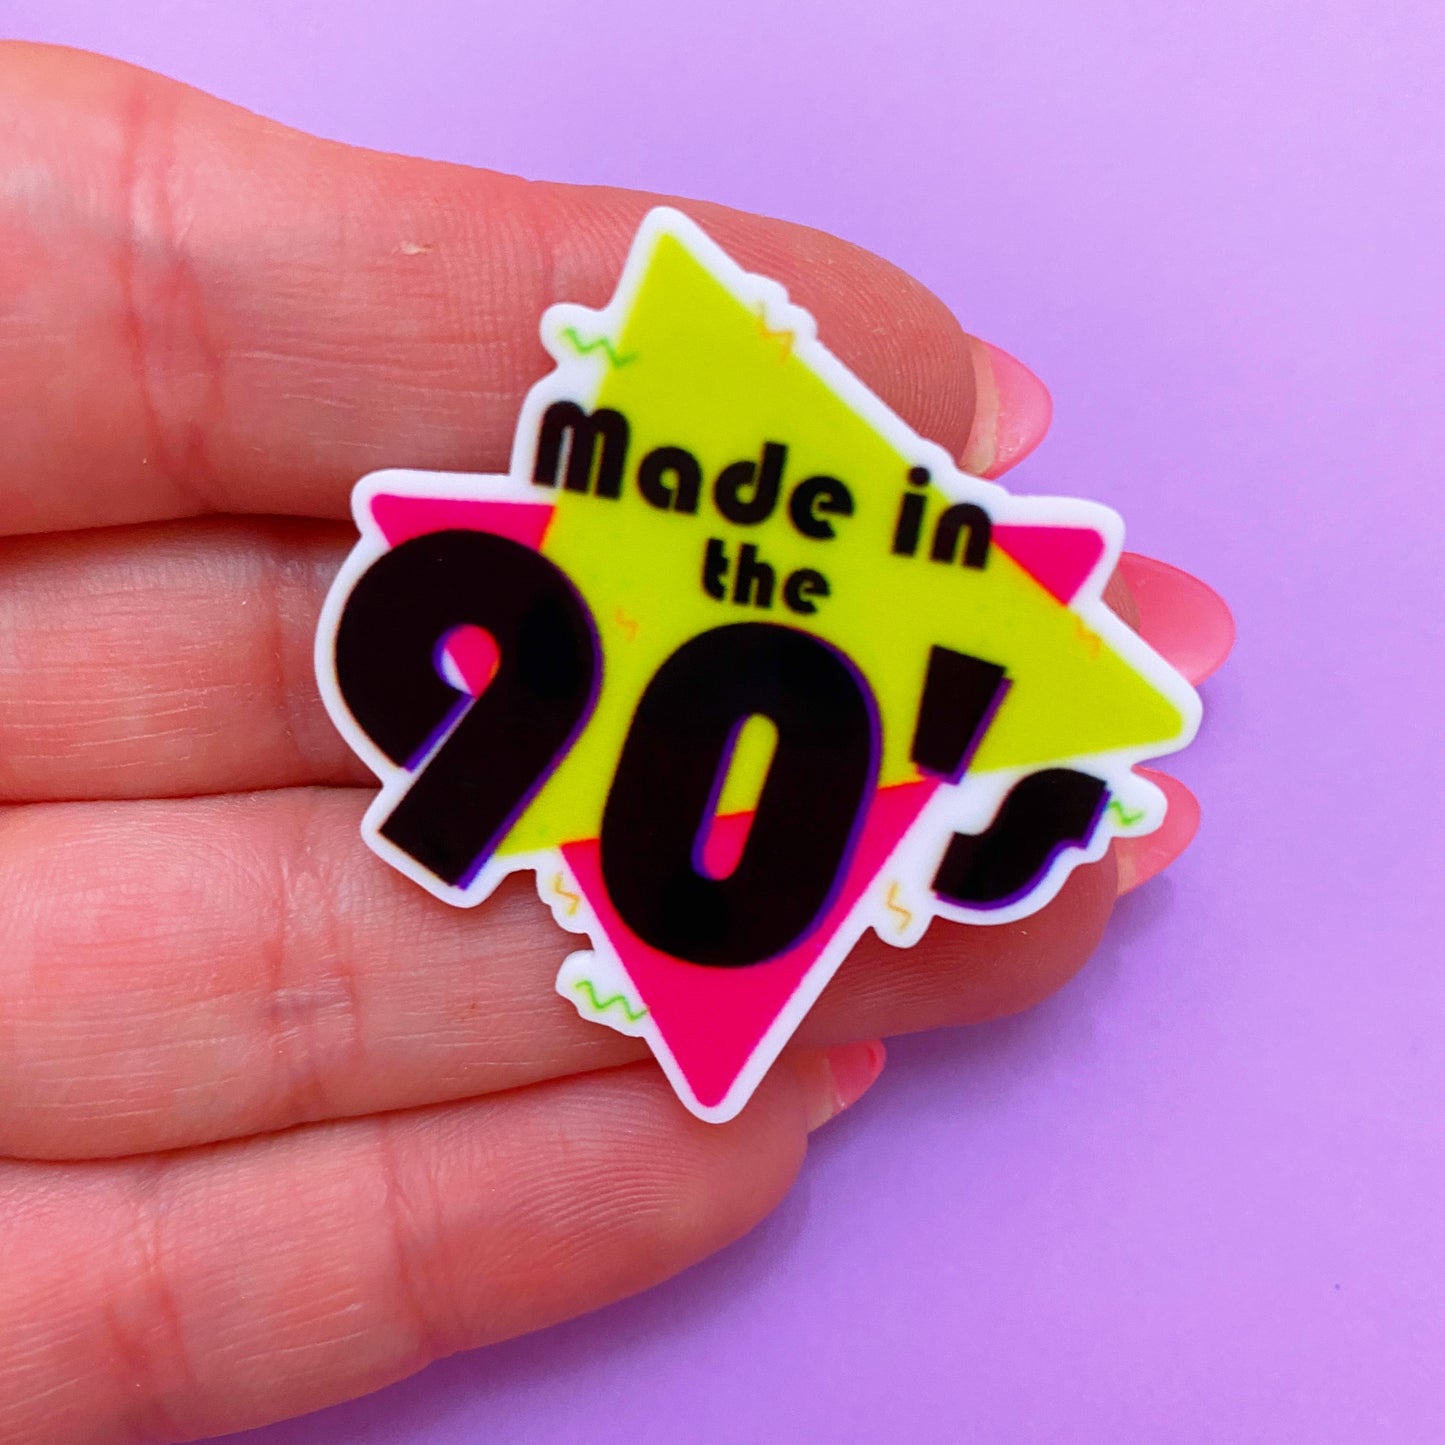 Made in The 90s Acrylic Brooch Pin